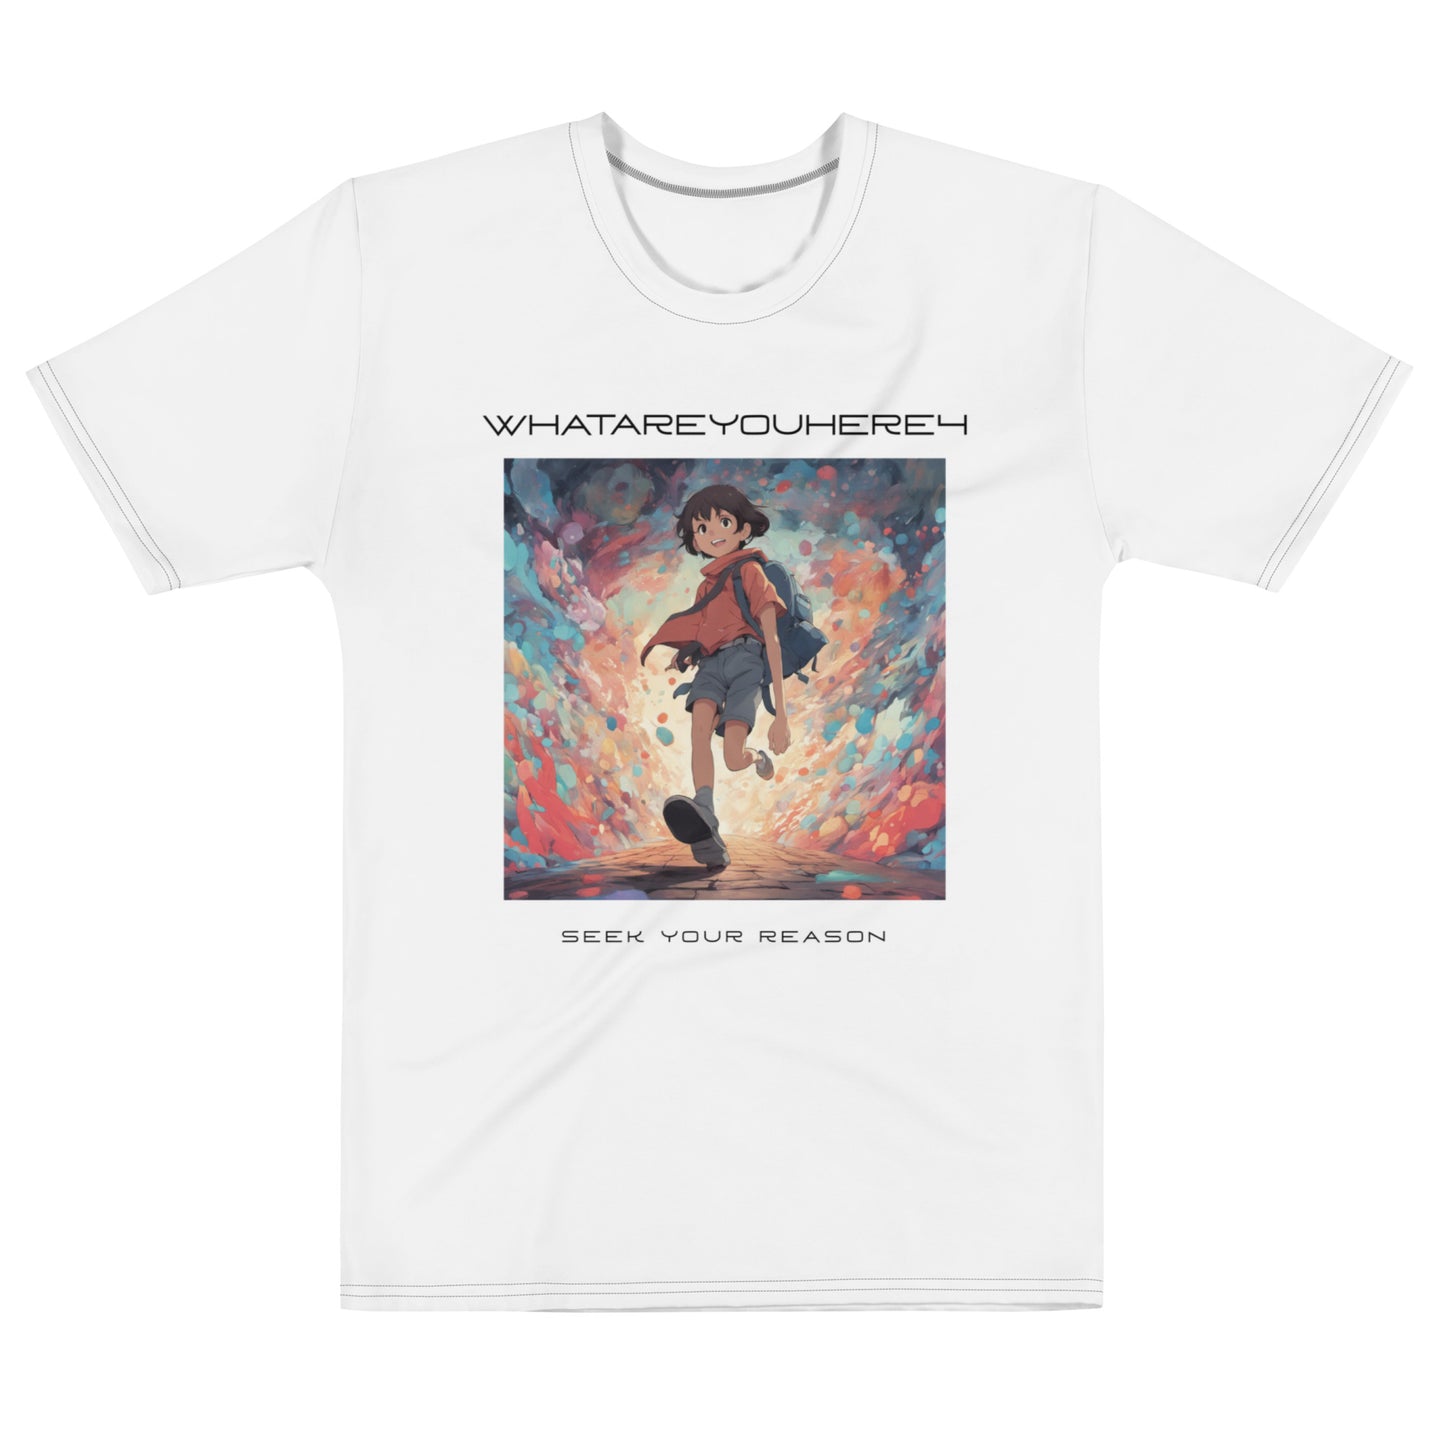 Journey of Self-Discovery" Anime-Inspired White T-shirt